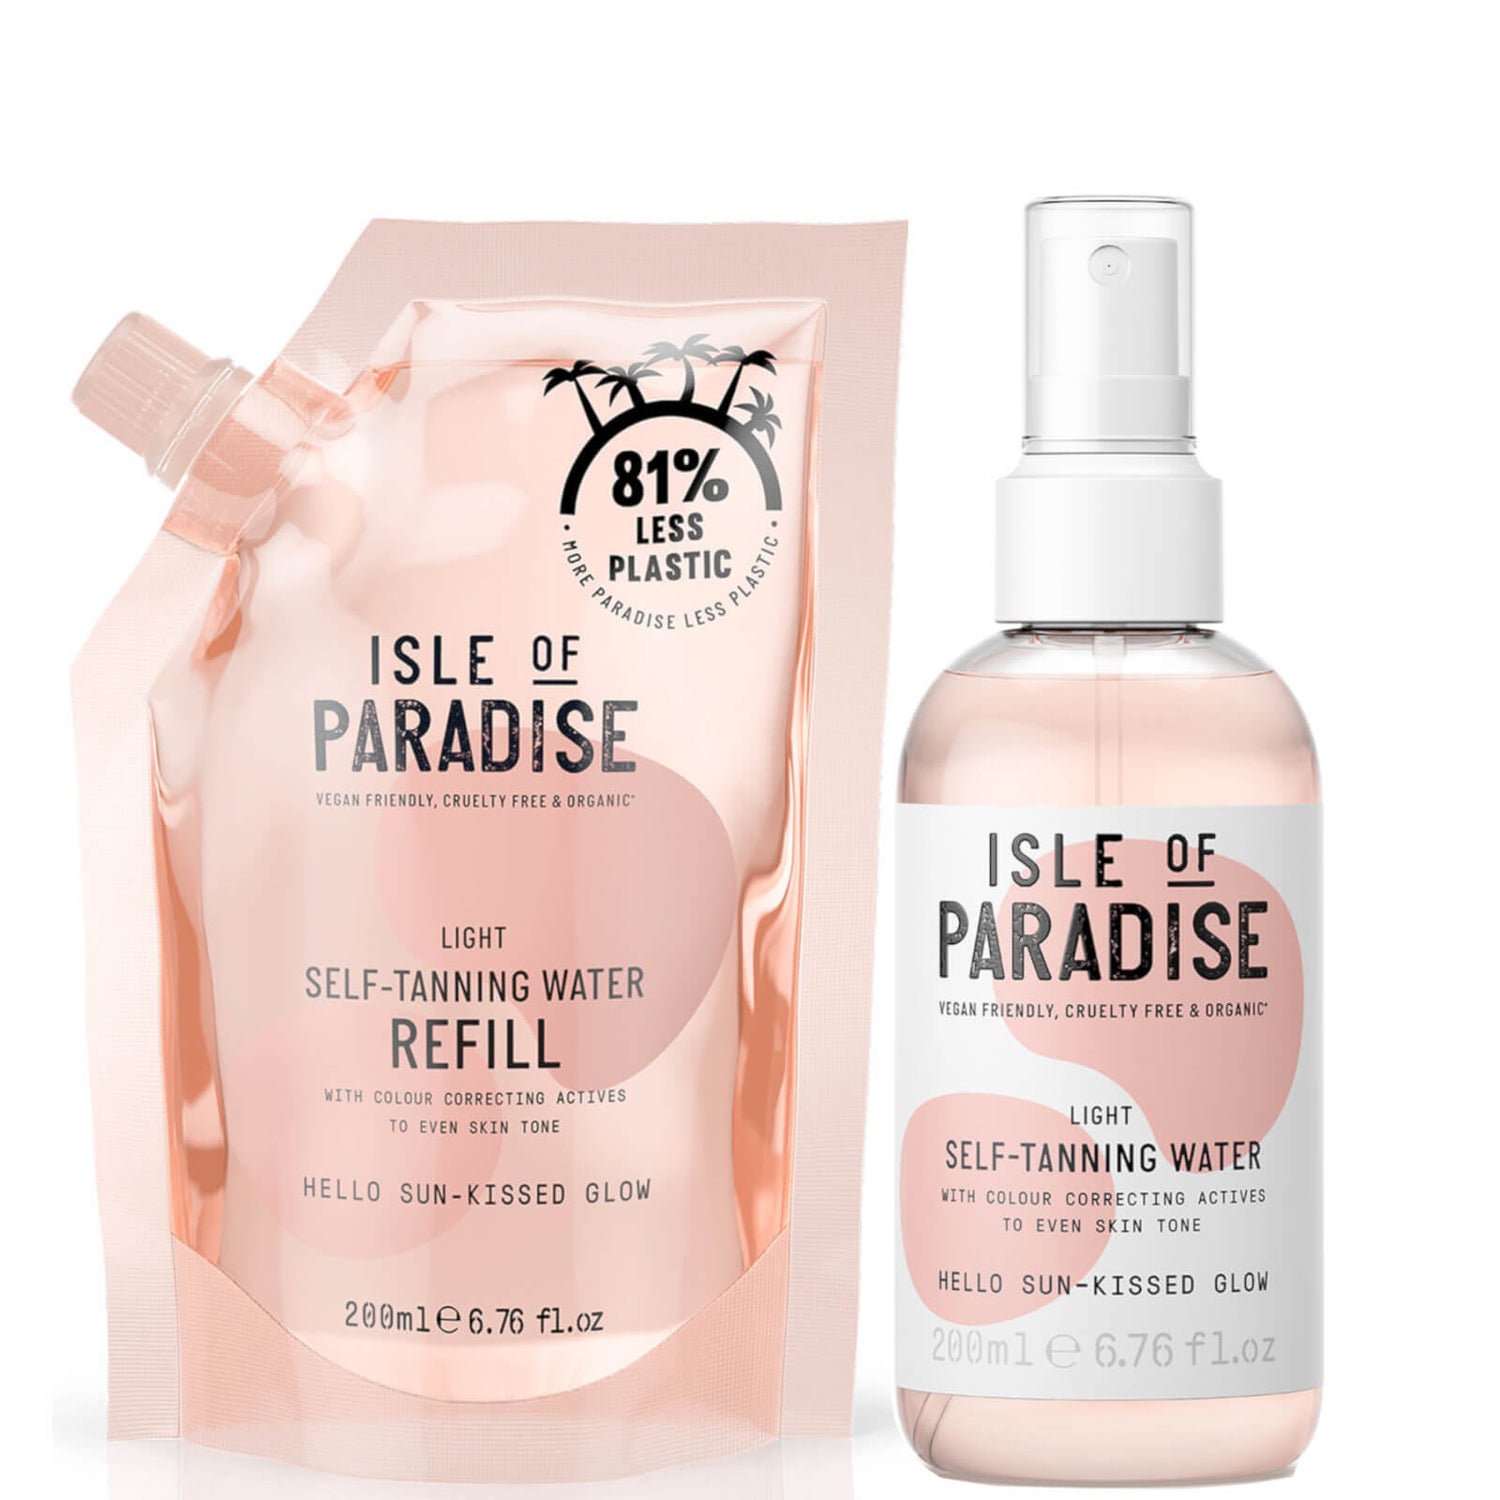 Isle of Paradise Light Self-Tanning Water and Refill Bundle